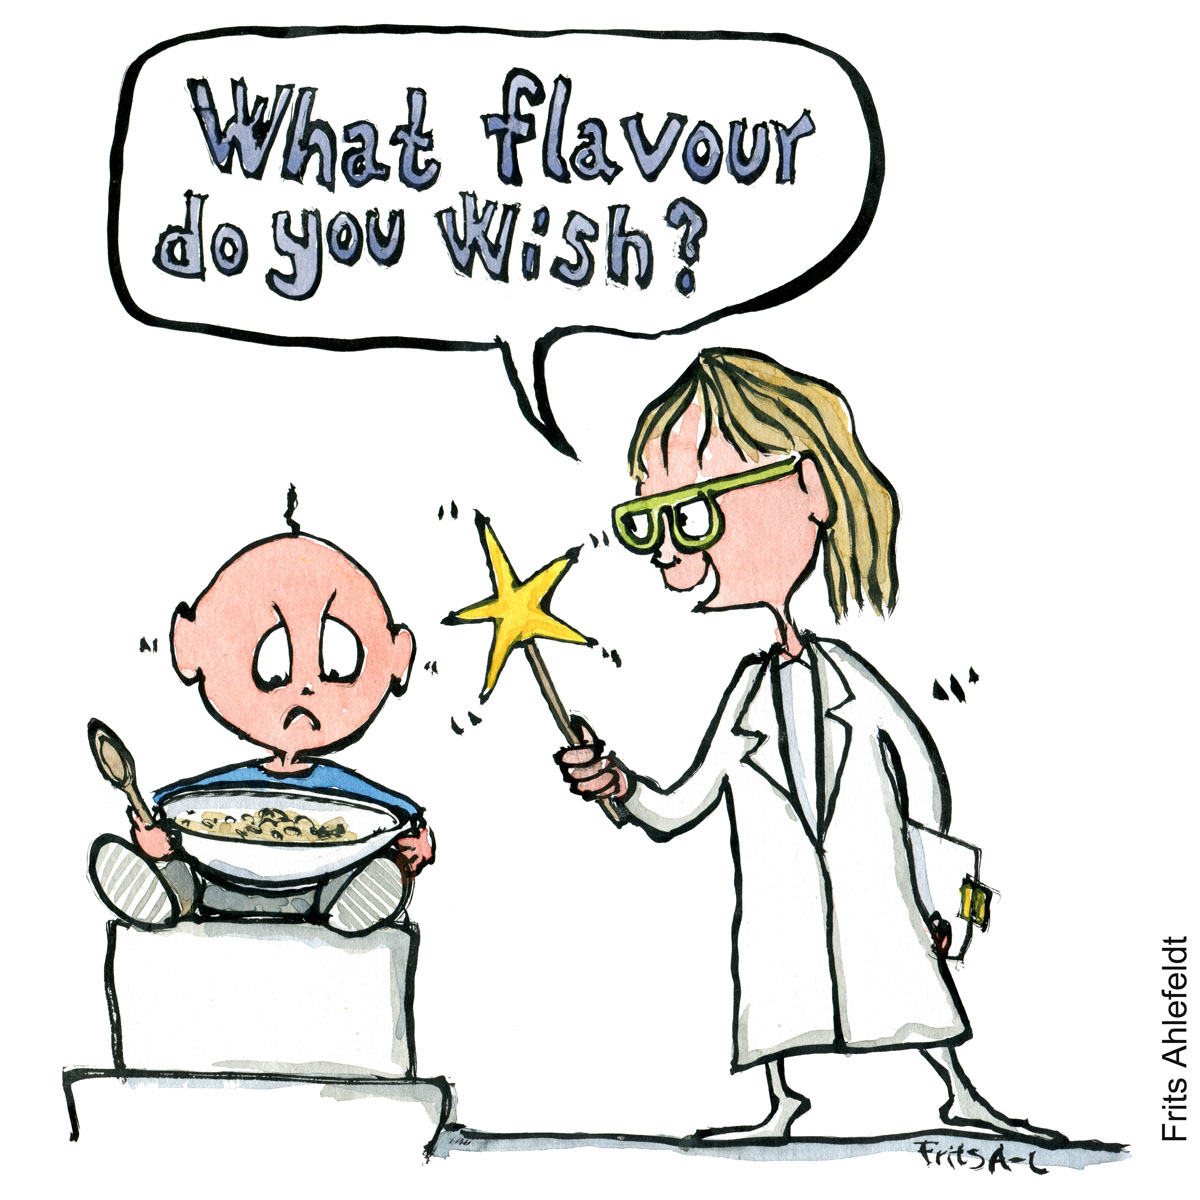 Drawing of a boy looking unhappy with a woman standing with a magic stick asking "what flavor do you wish for?" Handmade color illustration by Frits Ahlefeldt